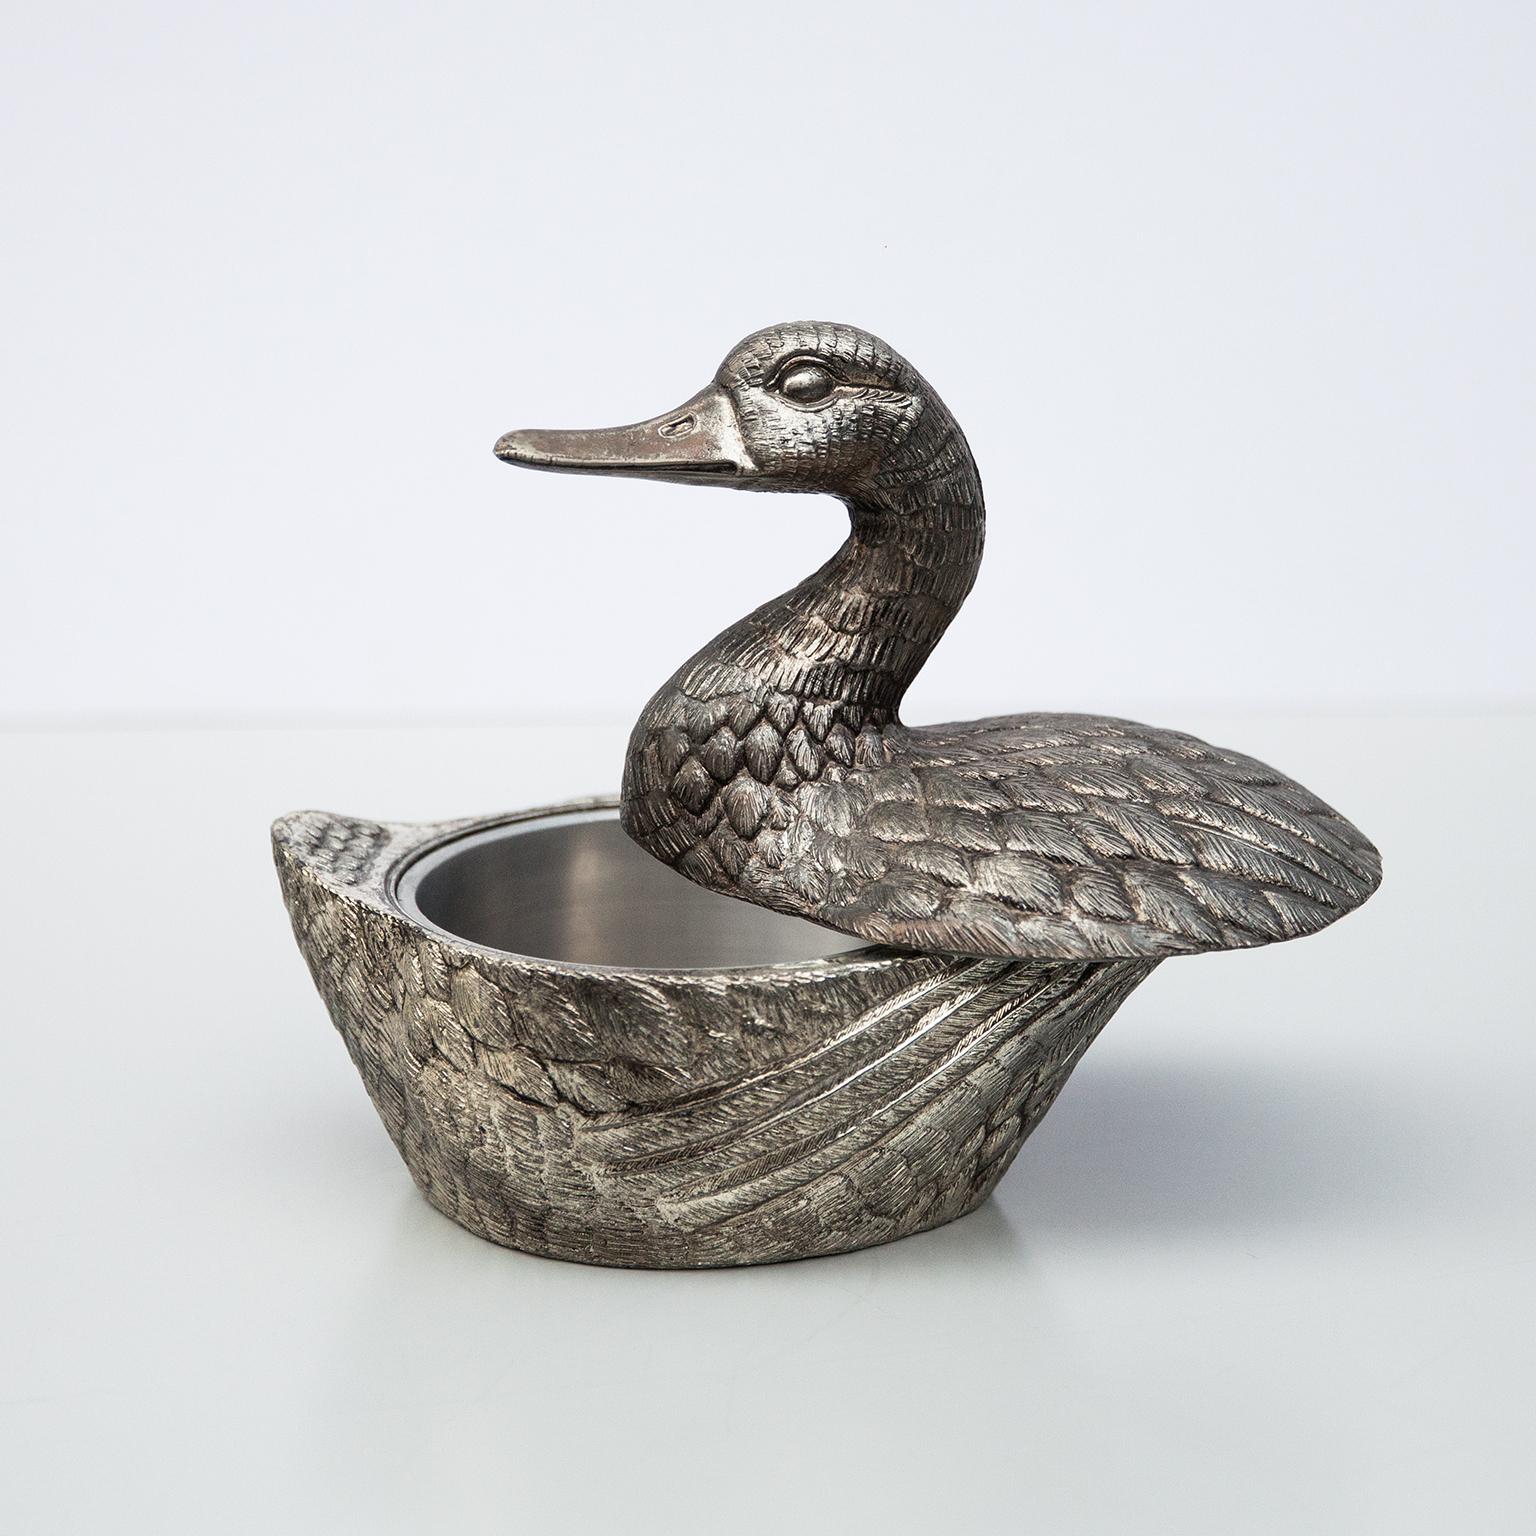 European Mauro Manetti Duck Ice Bucket, Italy, 1970s For Sale